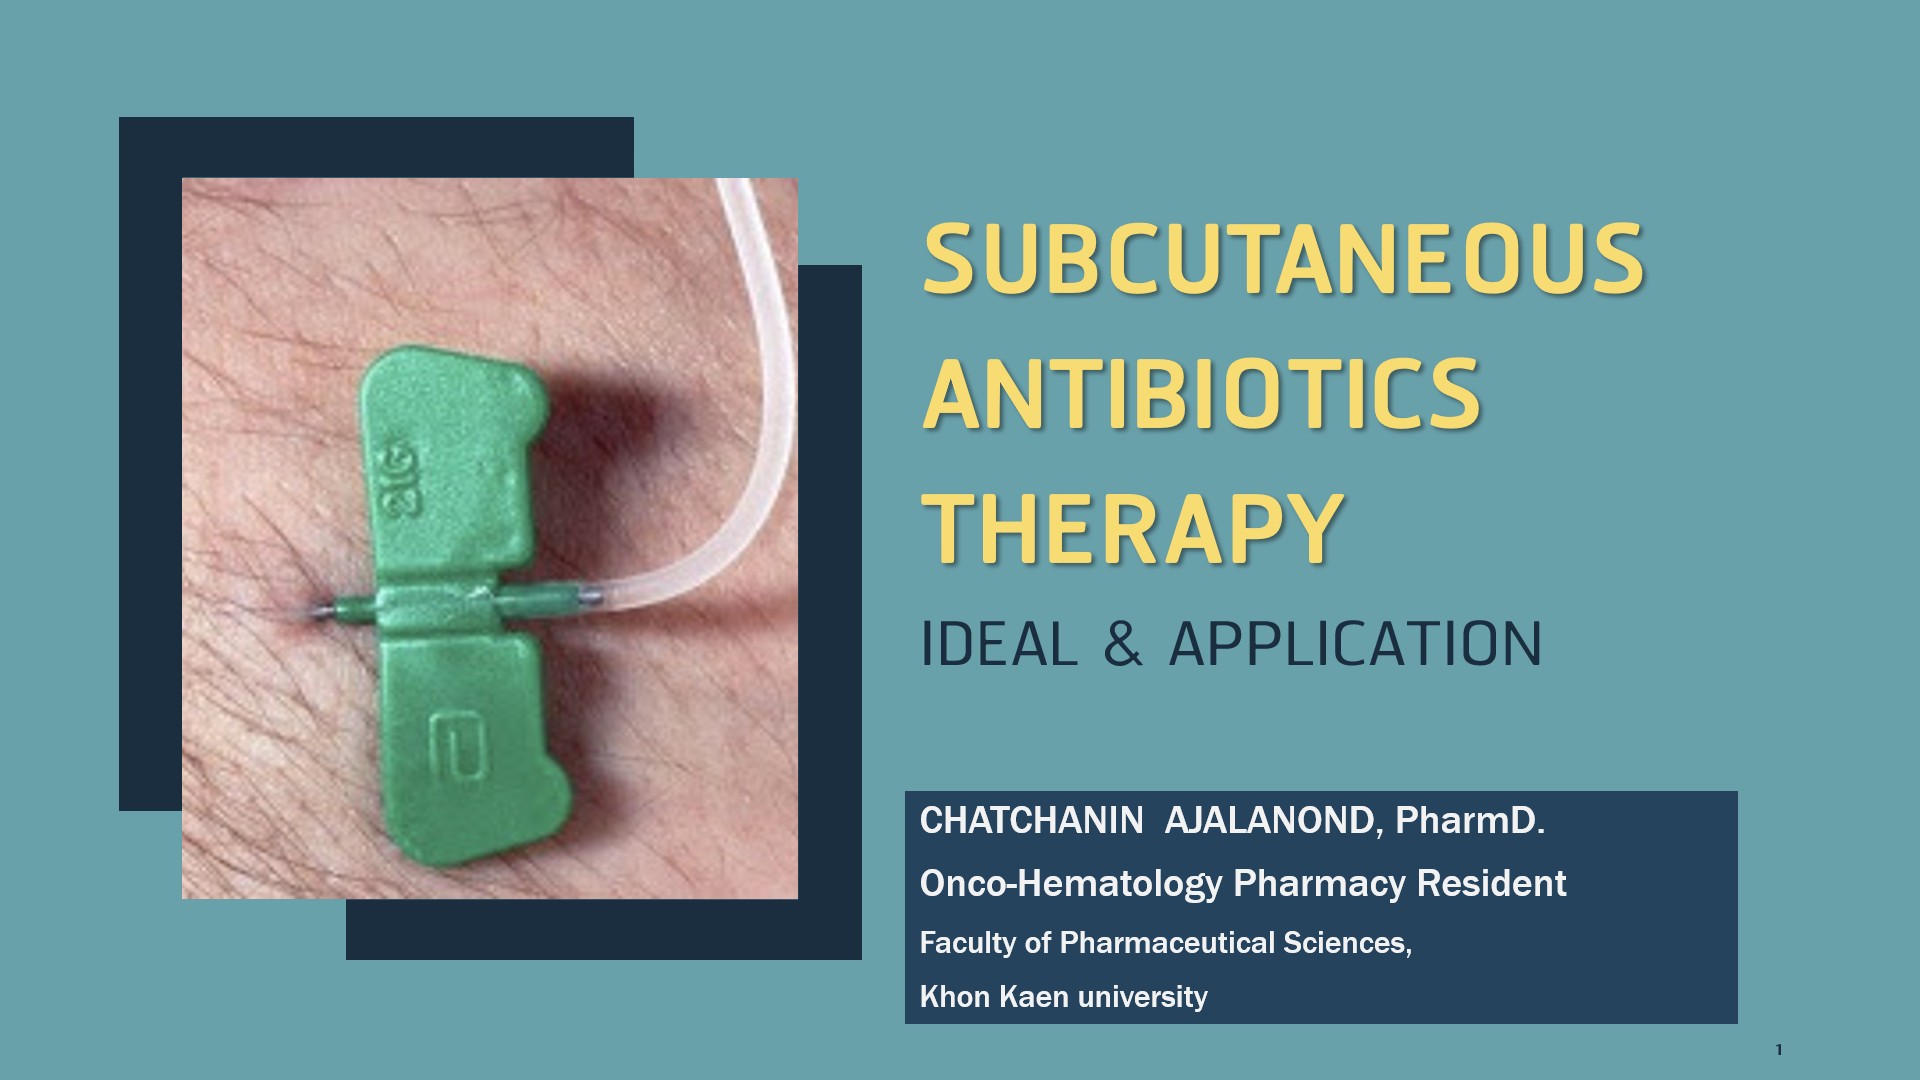 PC03 Subcutaneous Antibiotics Therapy: IDEAL &amp; APPLICATION